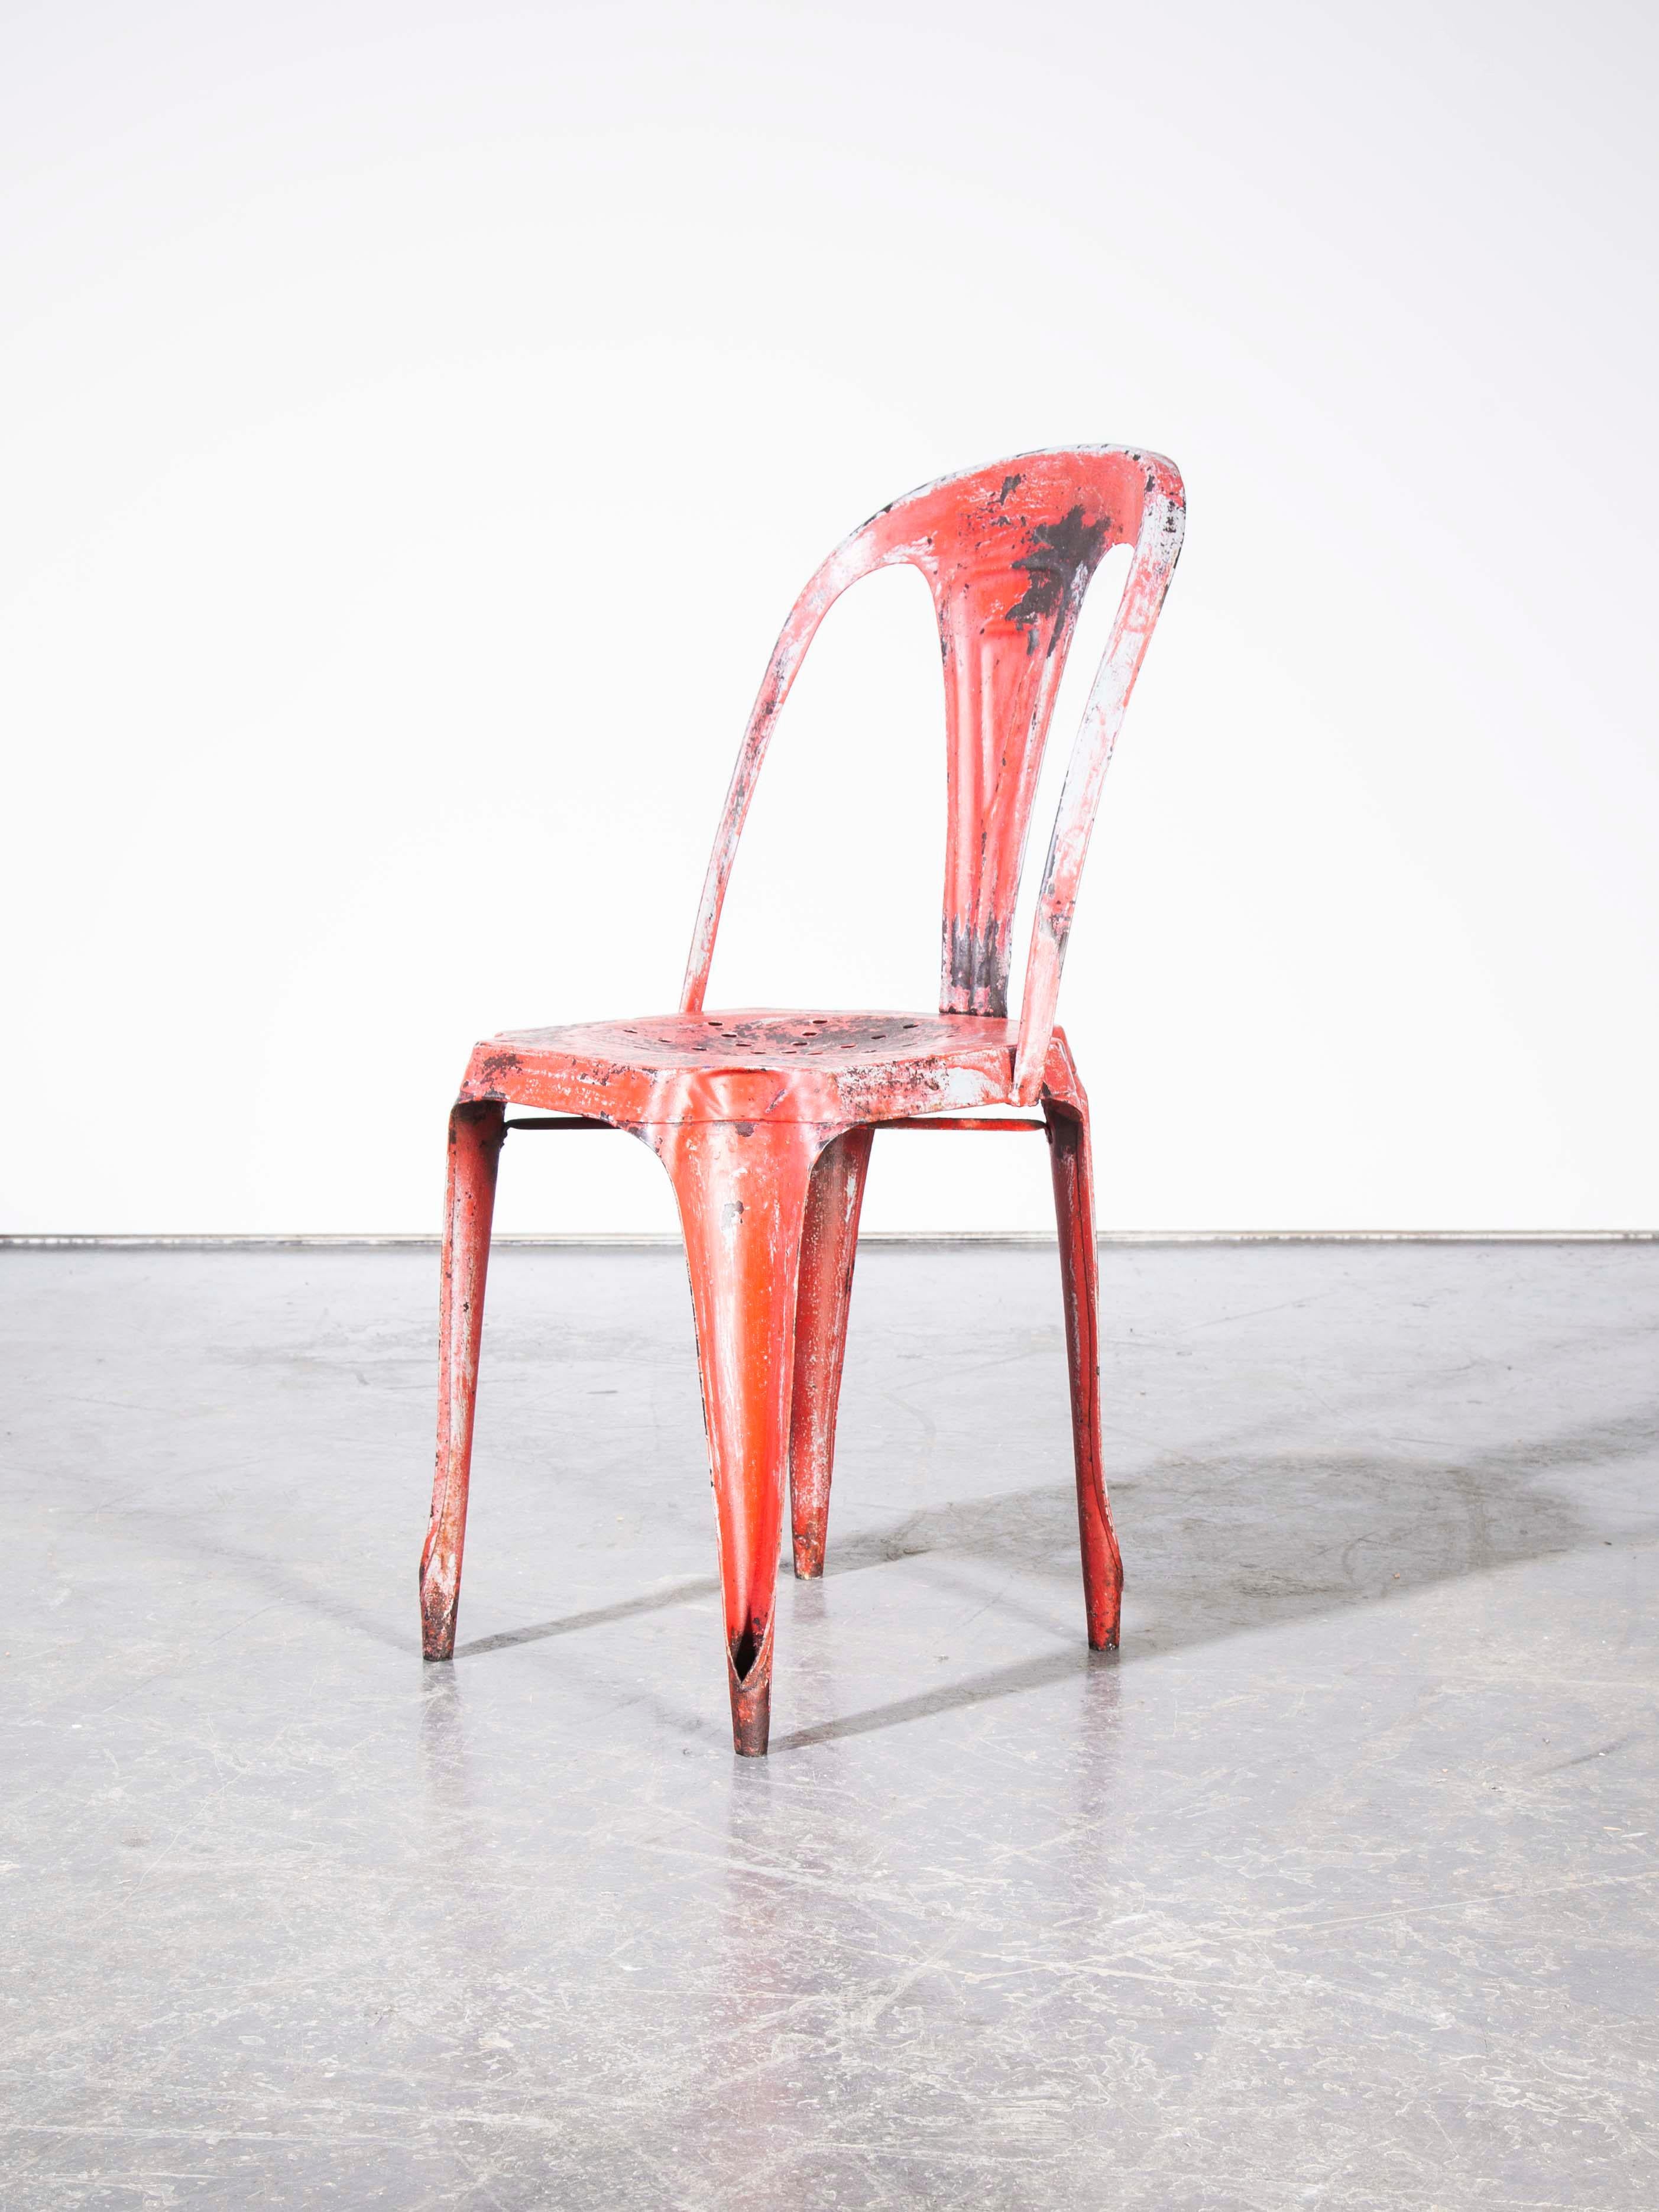 1950s Multipl’s red dining chair. Designed by Joseph Mathieu and made in Pierre Benite in Lyon. These chairs are an iconic part of Industrial French History. Each chair was hand pressed in huge industrial presses before being hand welded together.